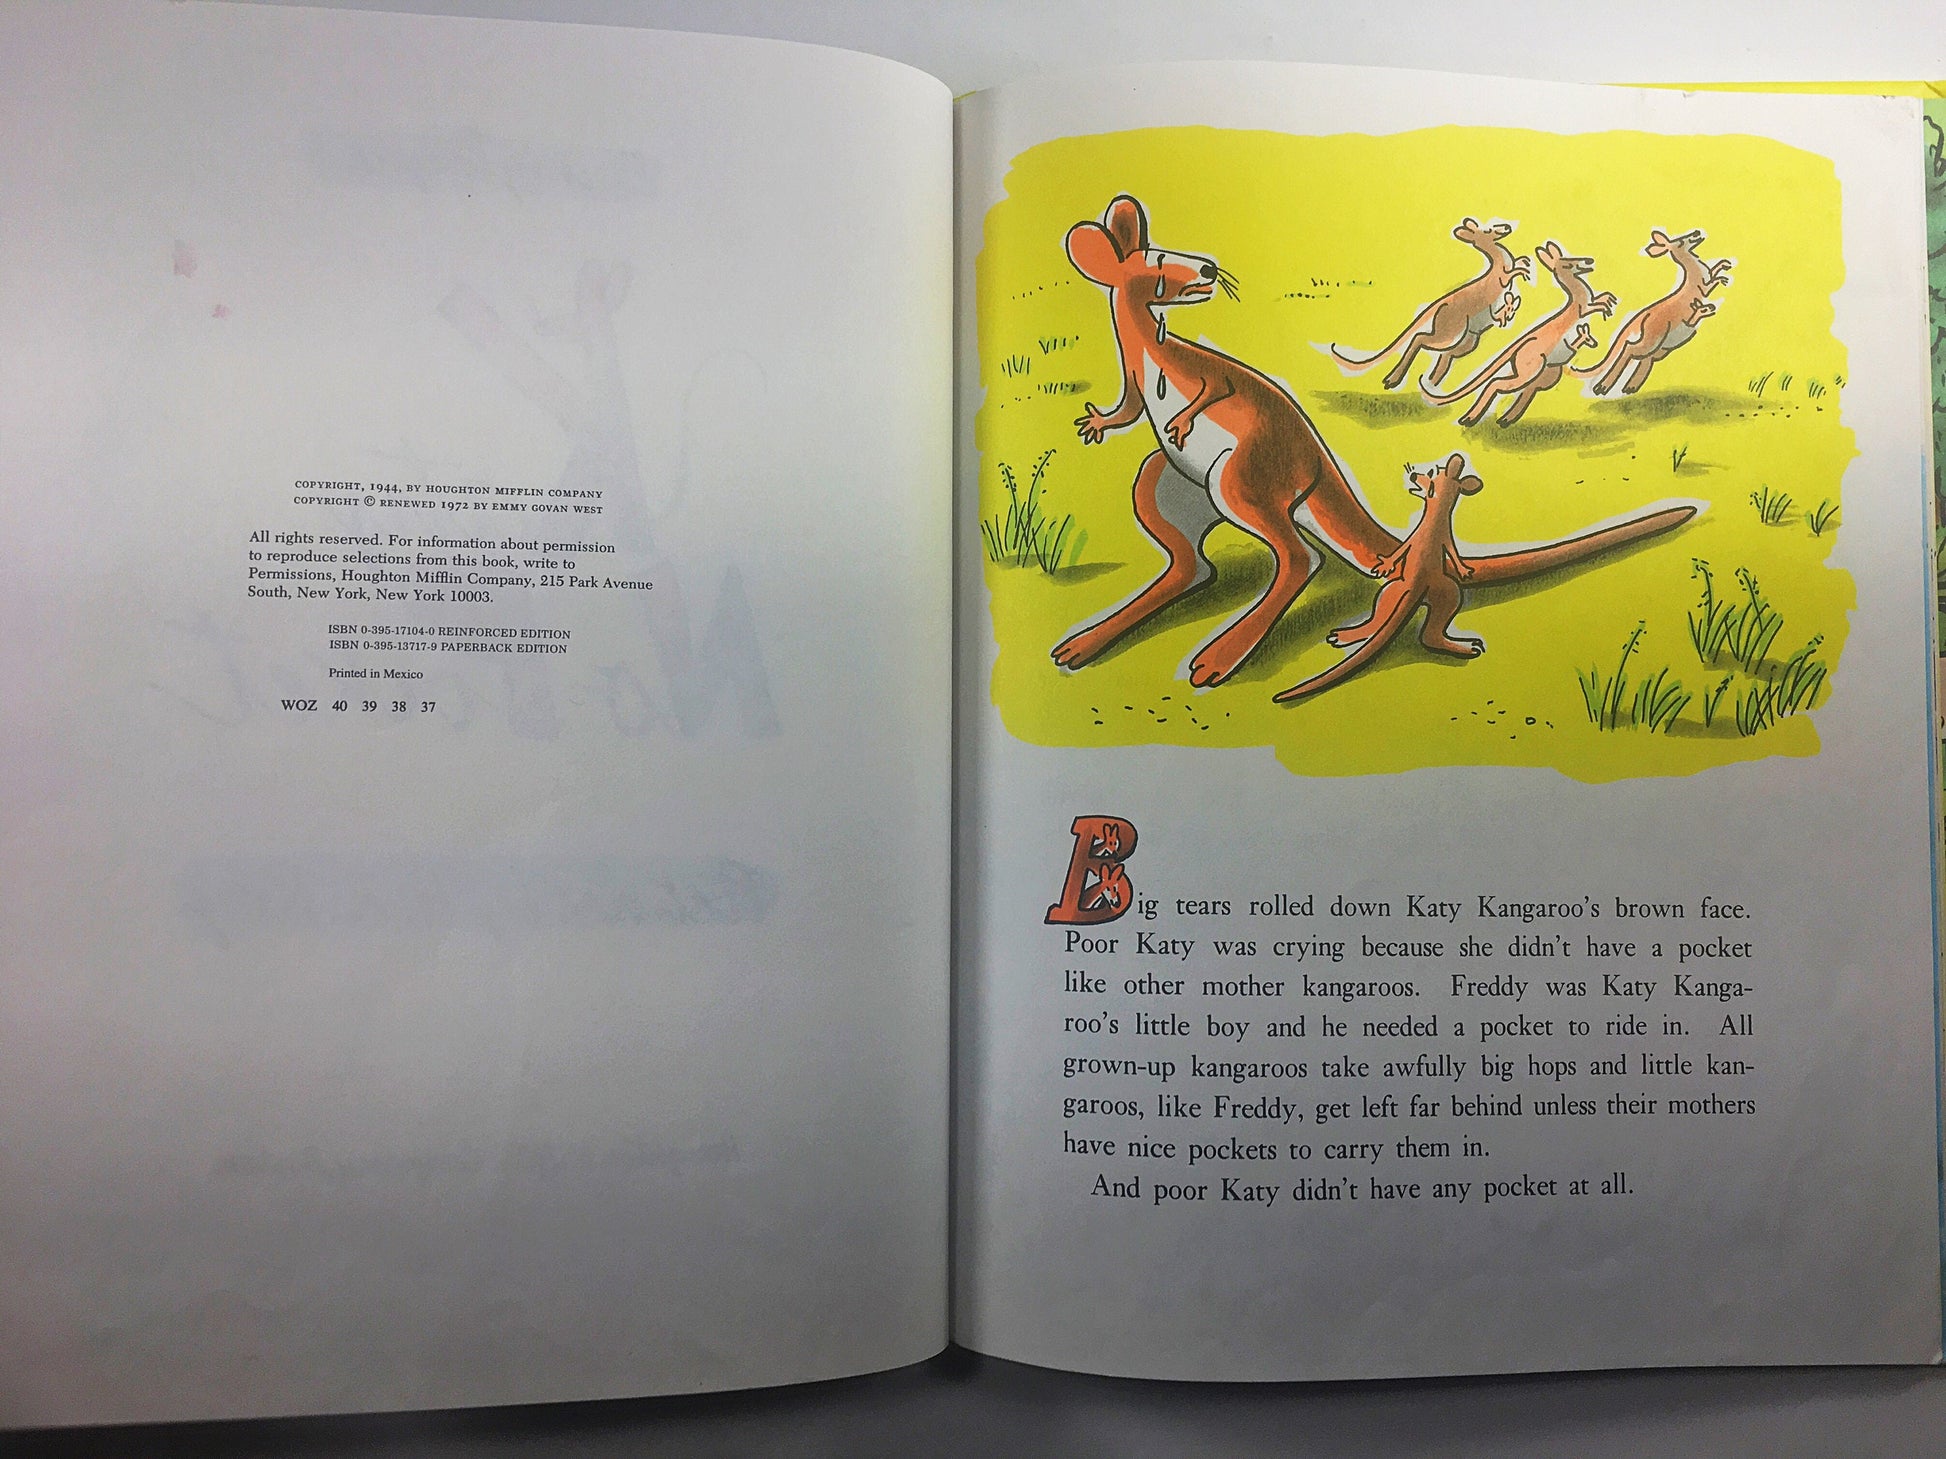 Curious George Katy No-Pocket. Vintage children's book illustrated by HA Rey circa 1972. Yellow book decor.